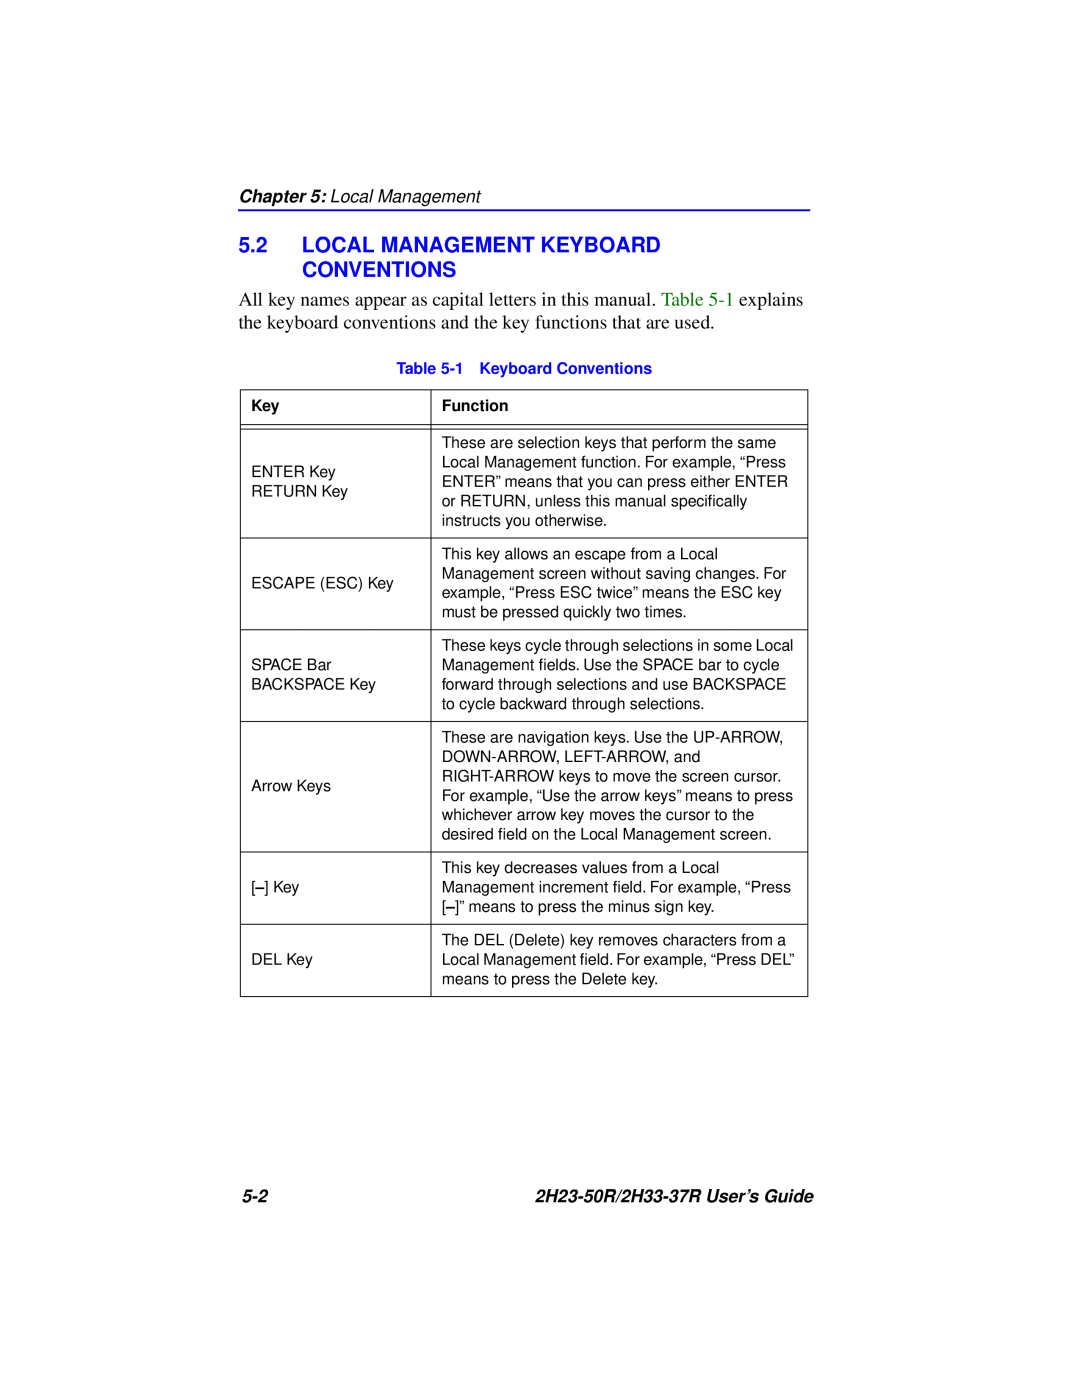 Cabletron Systems manual Local Management Keyboard Conventions, 2H23-50R/2H33-37R User’s Guide, 1 Keyboard Conventions 